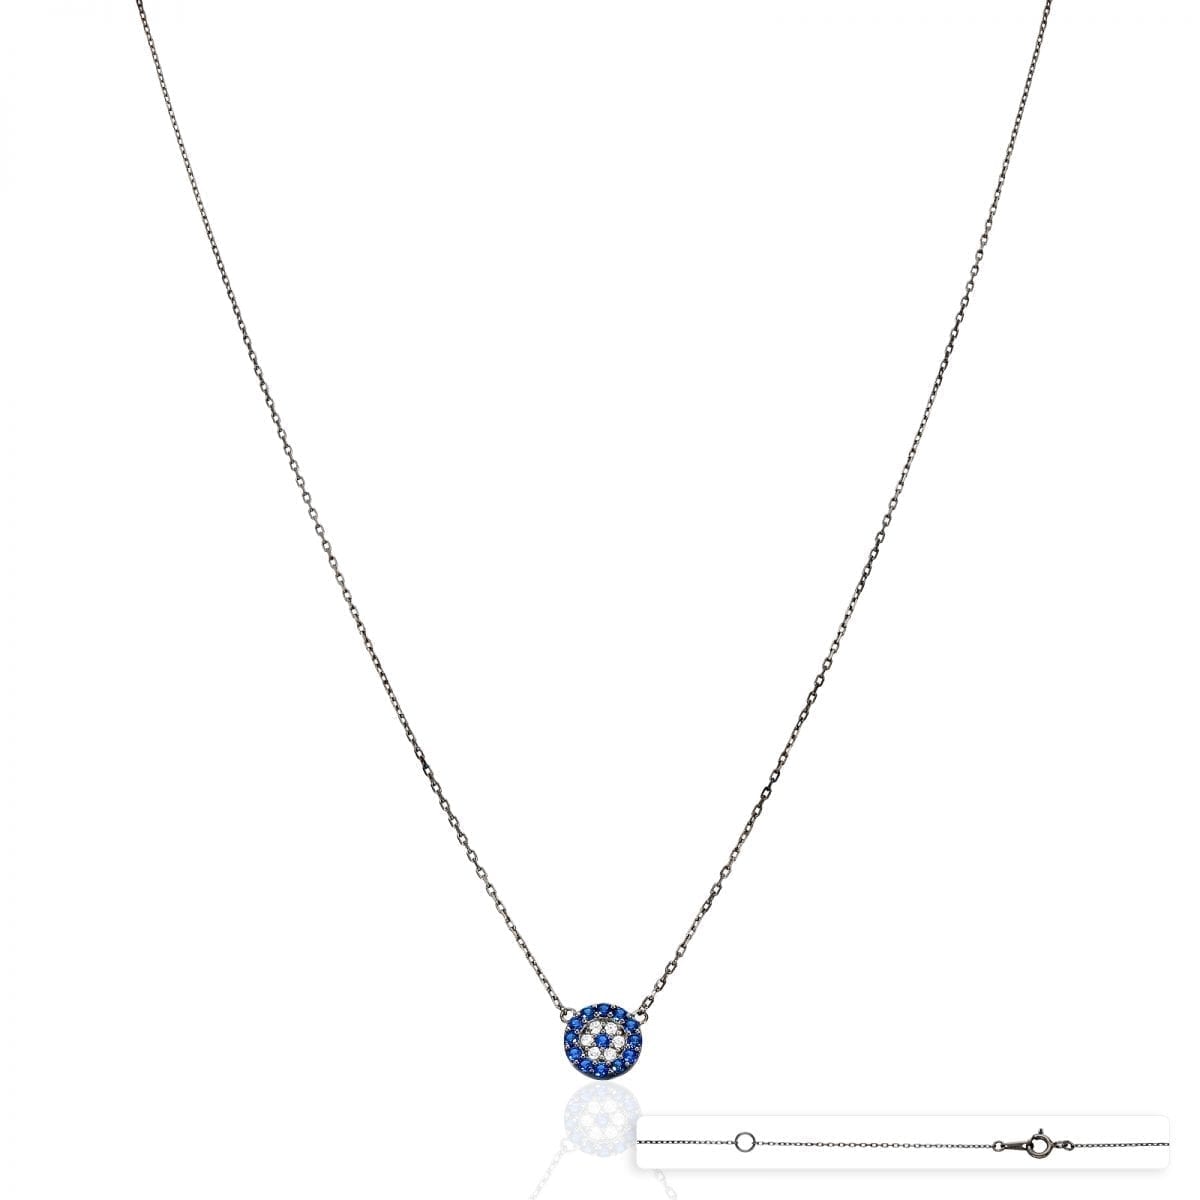 925 Sterling Silver White Gold Black Rhodium Plated CZ Evil Eye Necklace 18" - Black Rhodium Plated